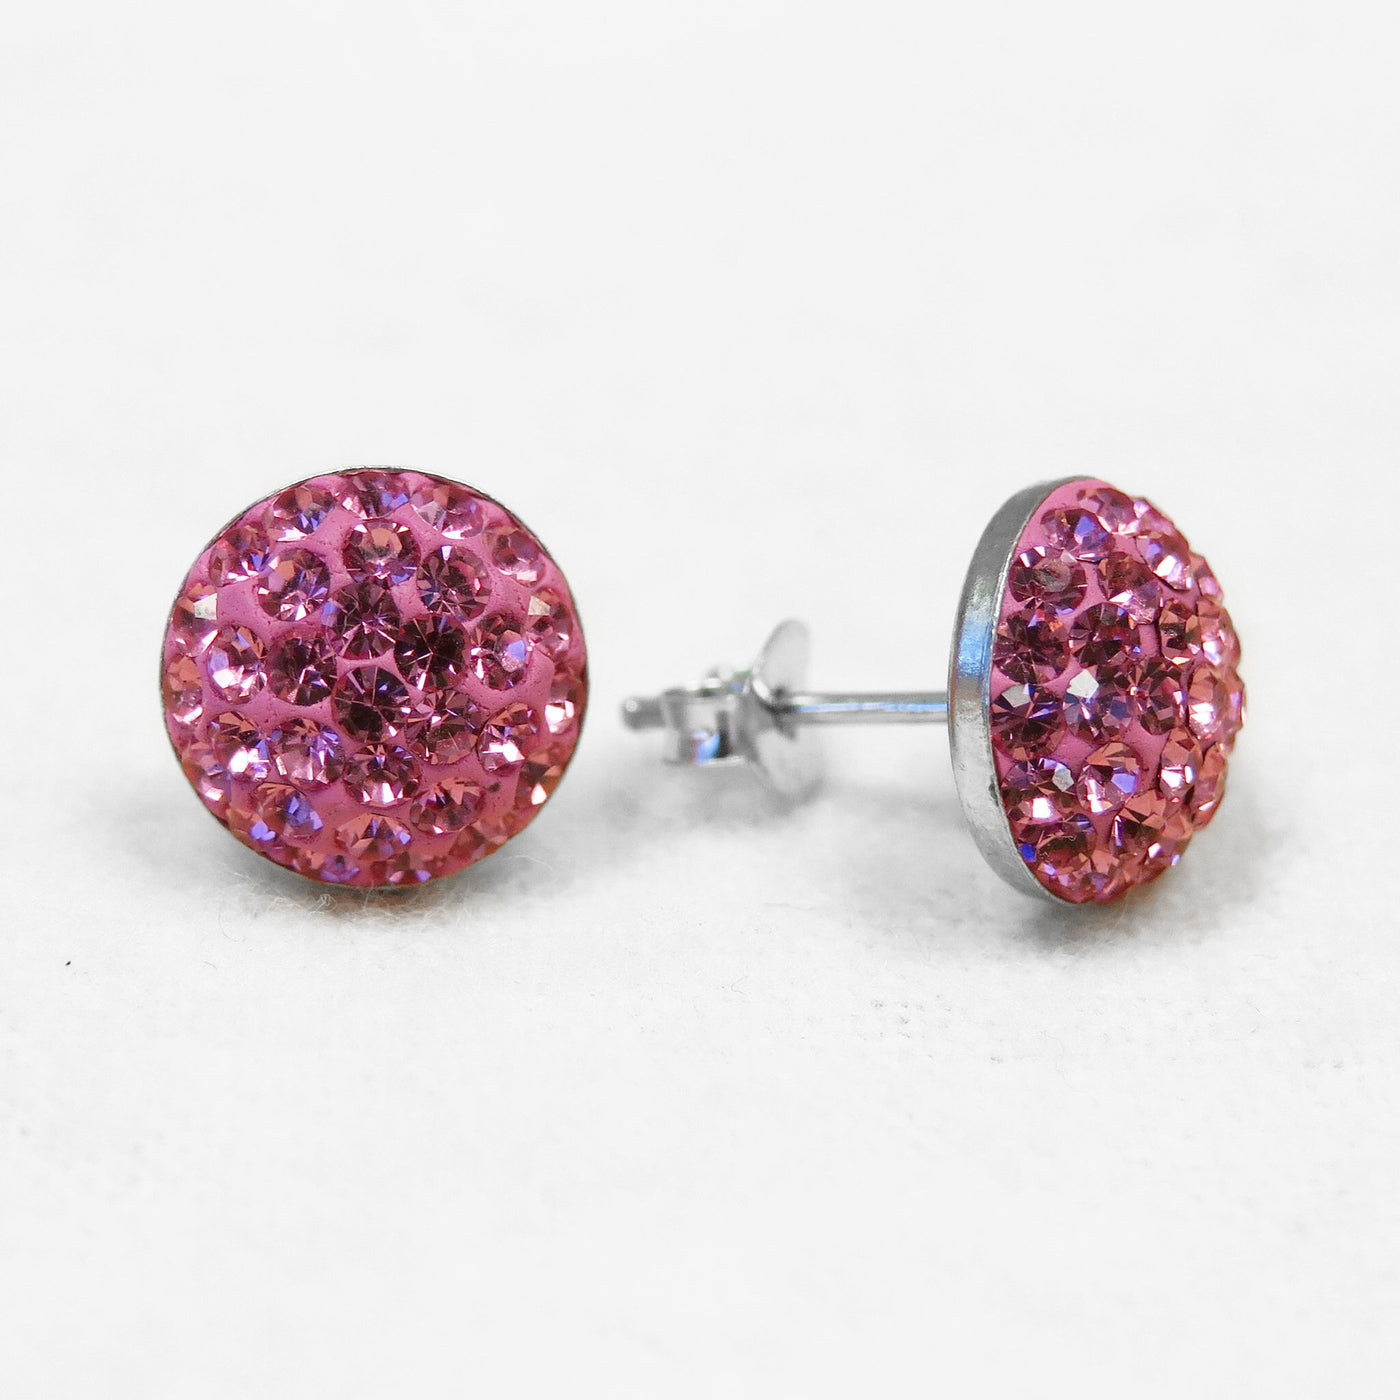 10mm Round Crystal Sterling Silver Earrings in Rose Pink | Annie and Sisters | sister stud earrings, for kids, children's jewelry, kid's jewelry, best friend